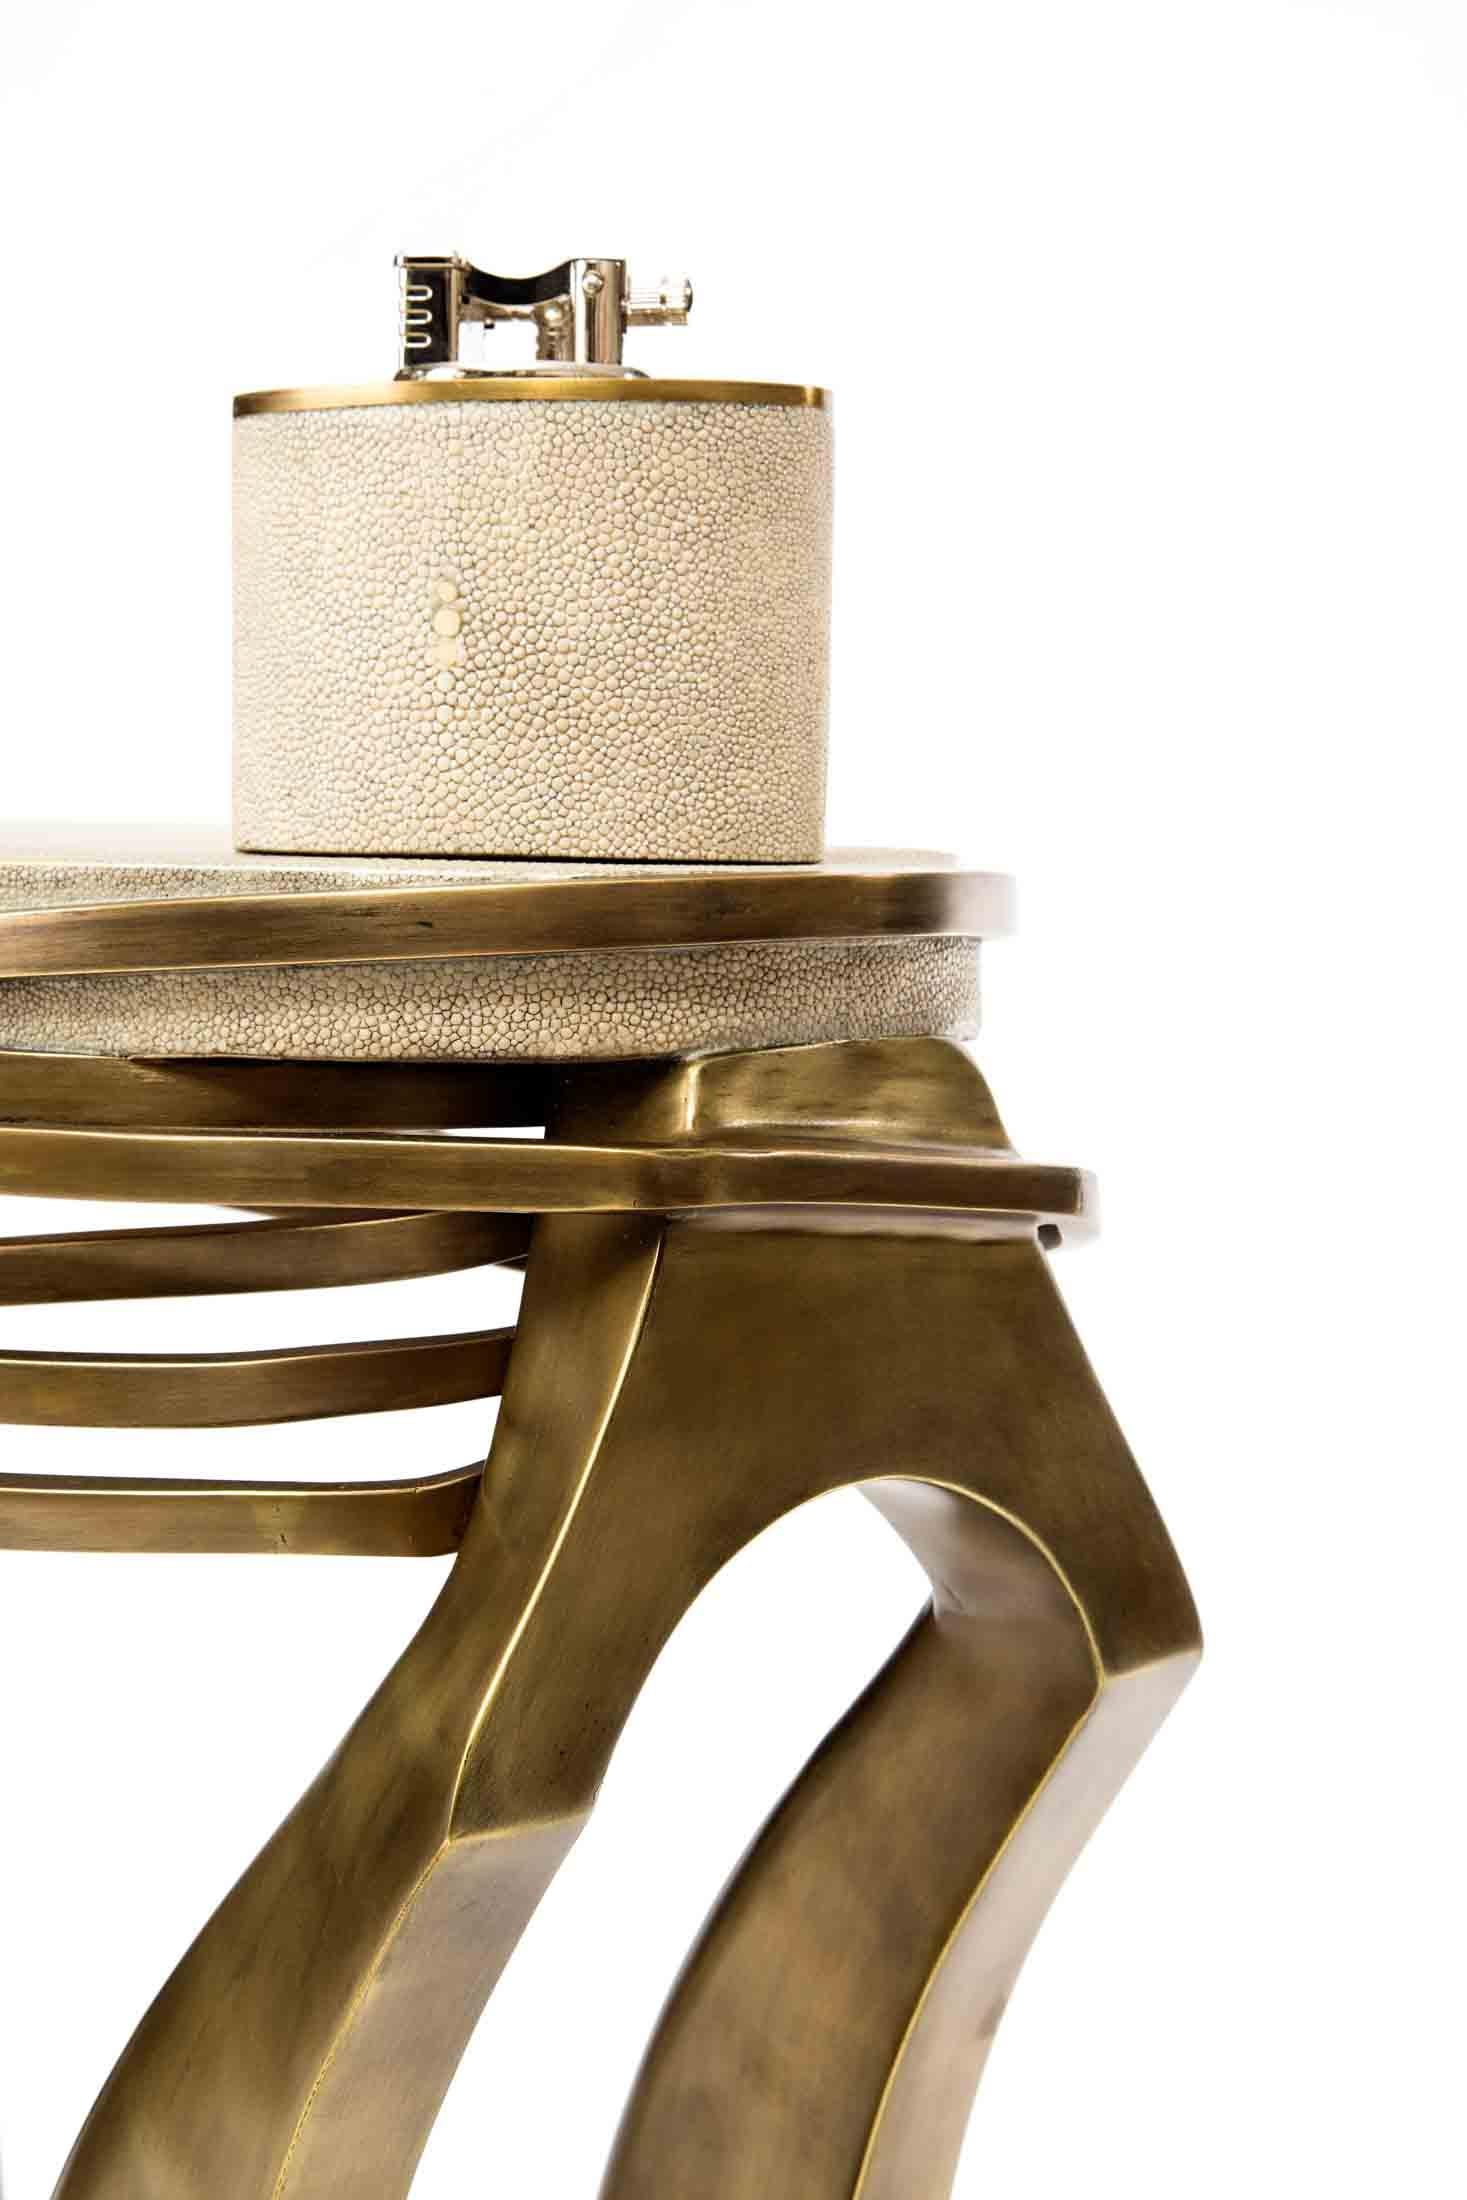 Hand-Crafted Galaxy Side Table Small in Cream Shagreen & Bronze-Patina Brass by Kifu Paris